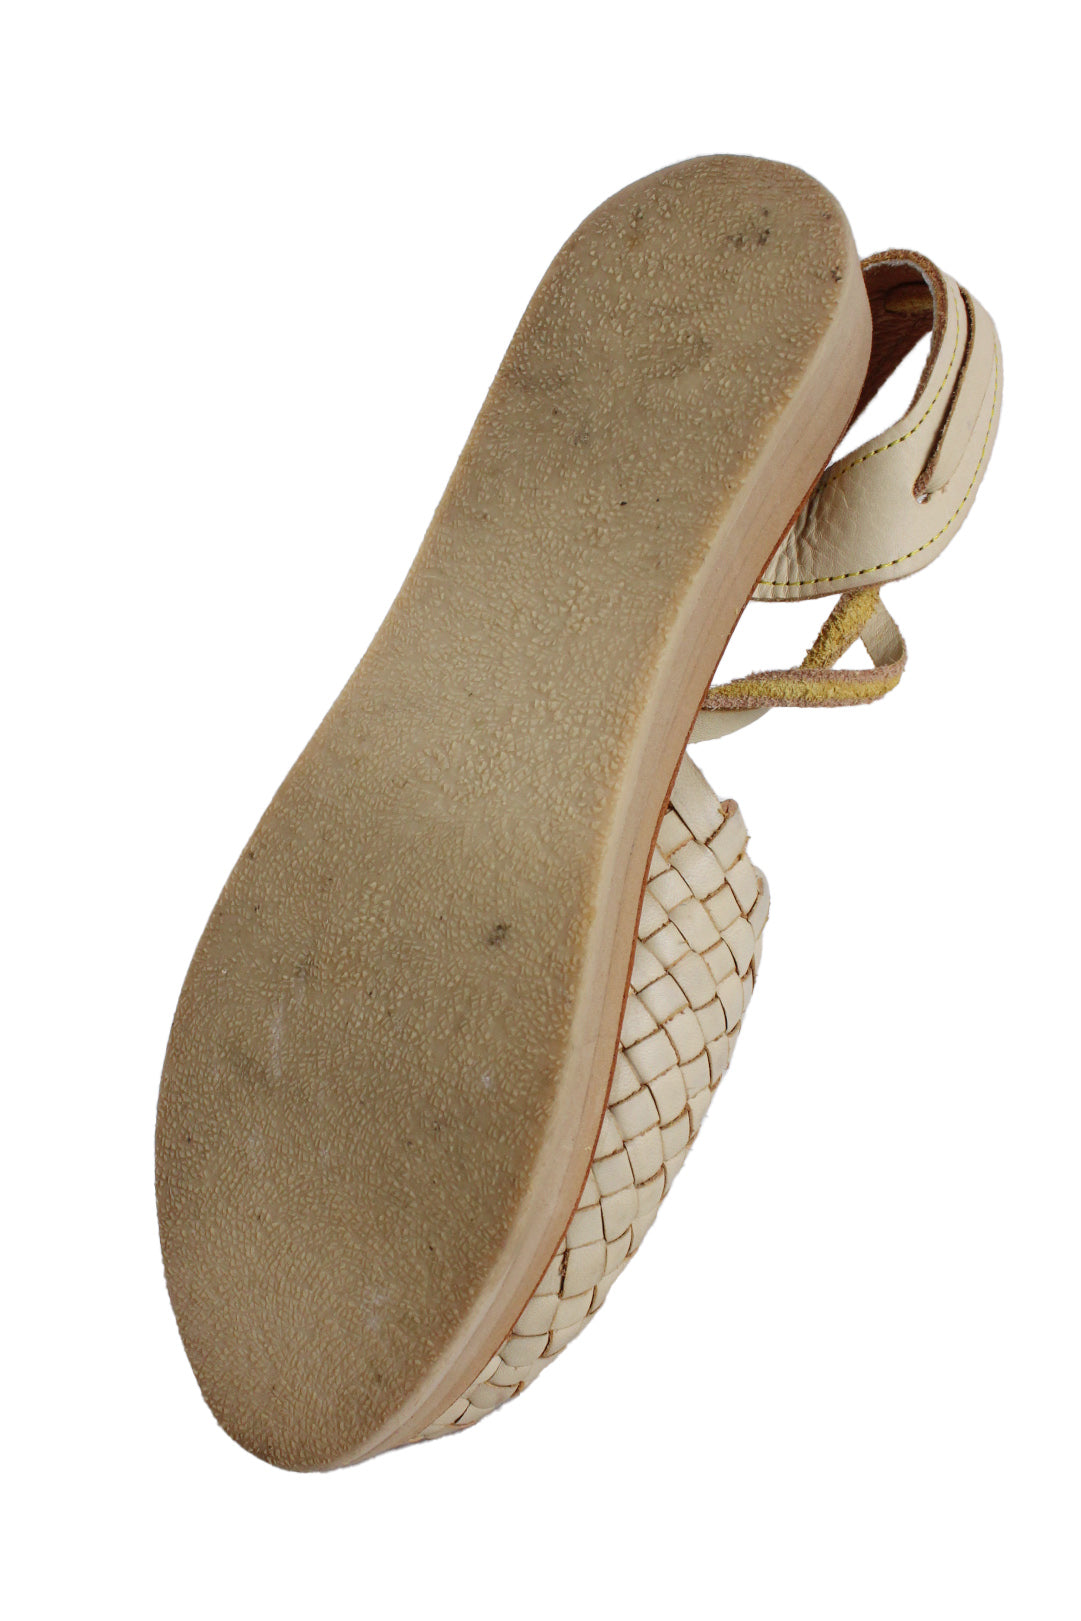 bottom angle back angle las tres marias beige woven leather sandals.